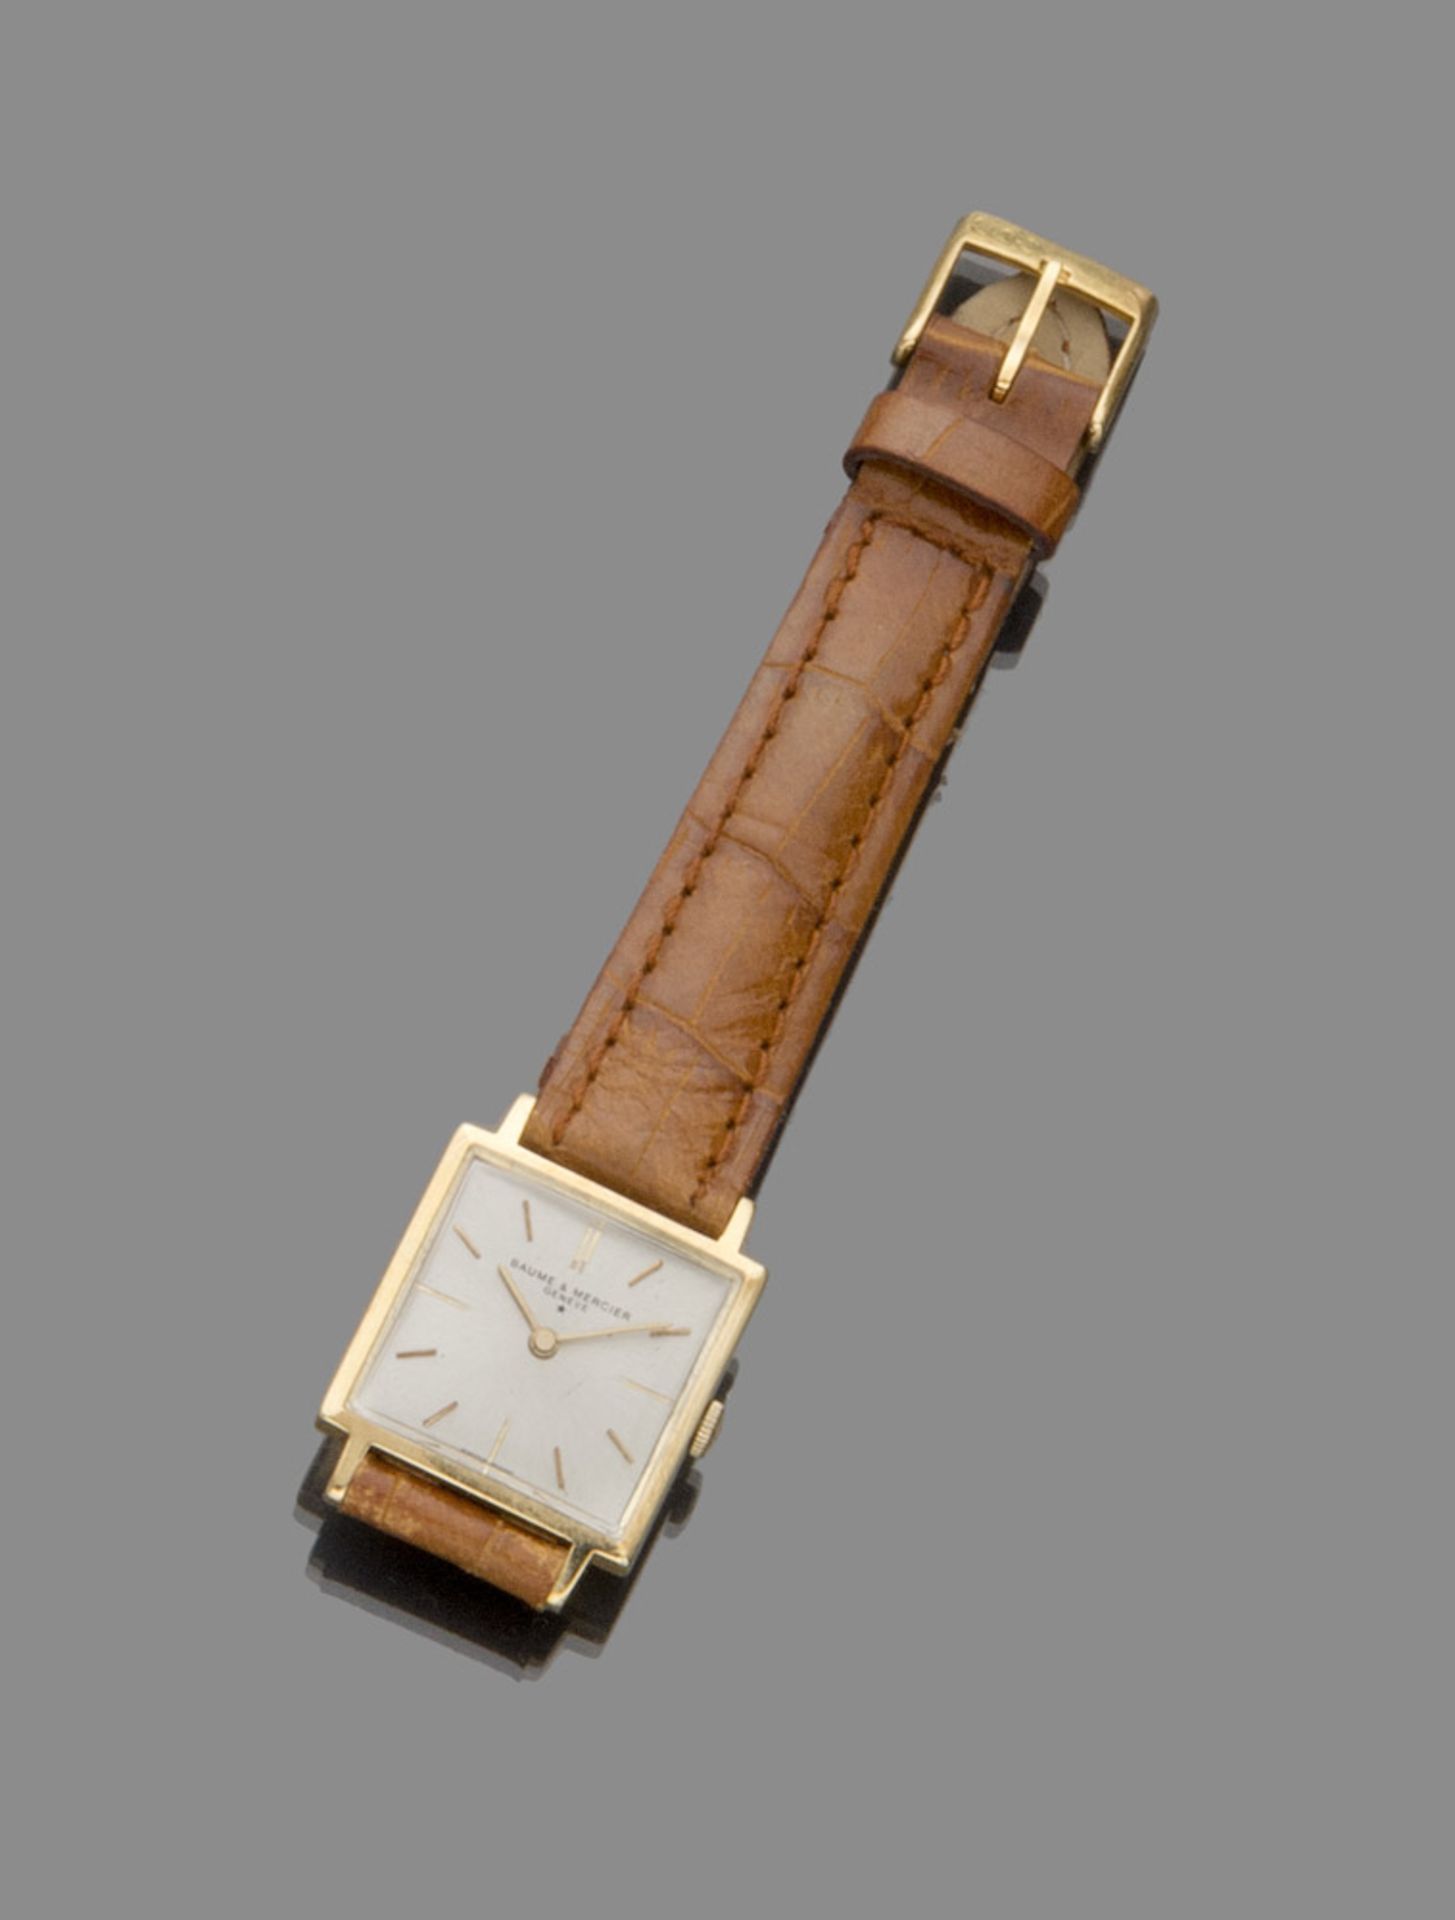 BAUME & MERCIER WRIST WATCH yellow gold case 18 kts., manual movement, champagne dial with applied